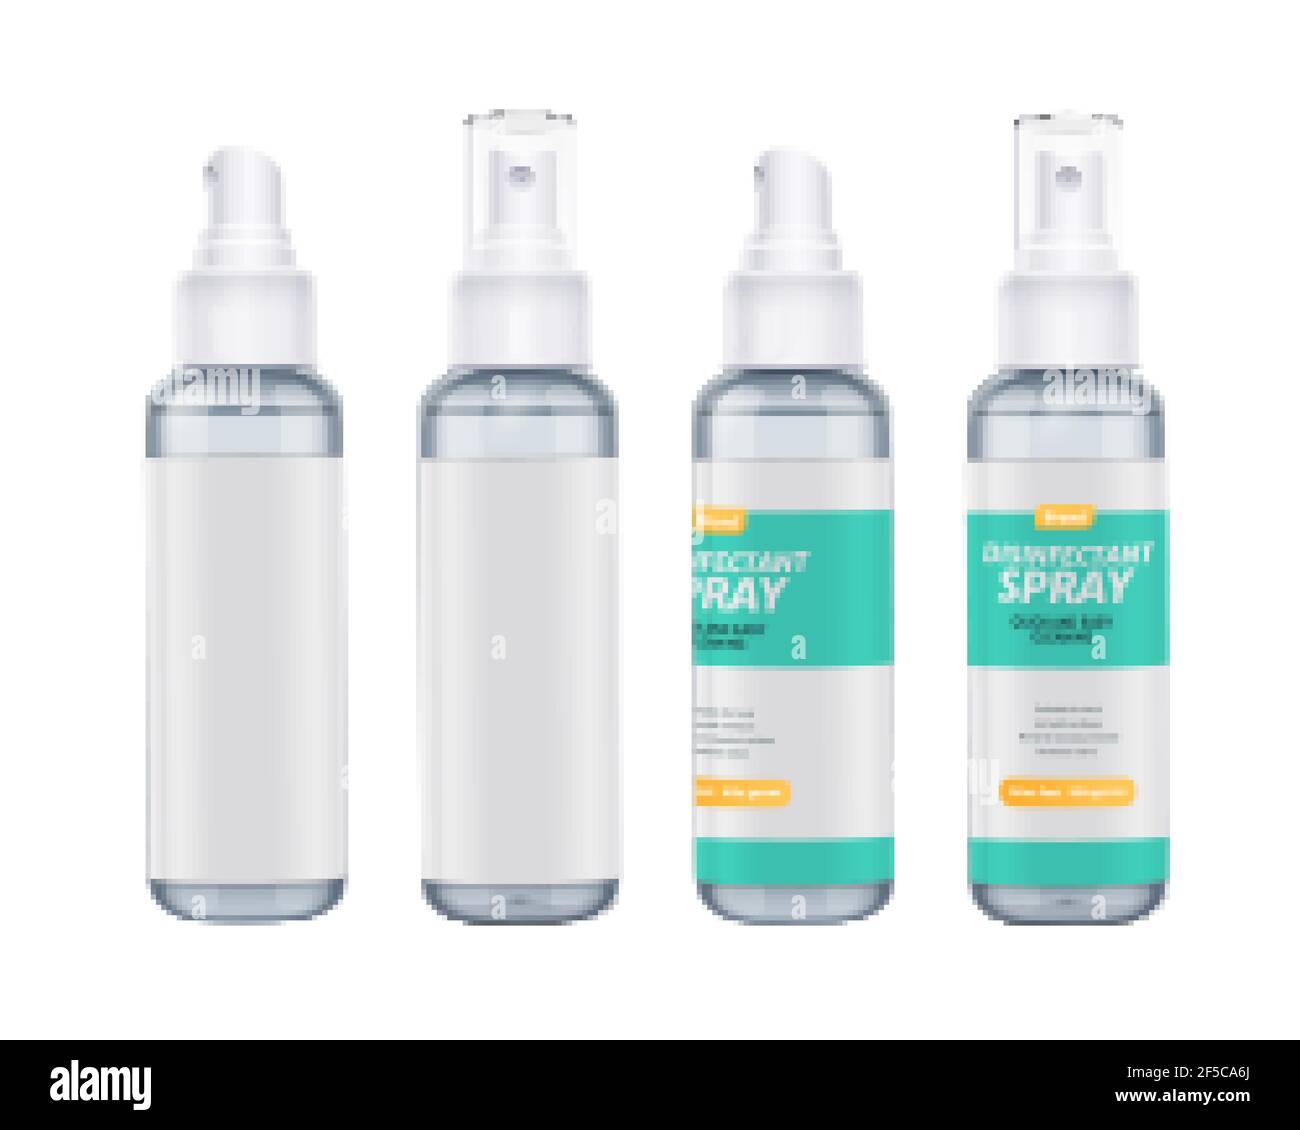 Set of disinfectant spray bottles in 3d illustration, elements isolated on white background, two with label design and two without Stock Vector